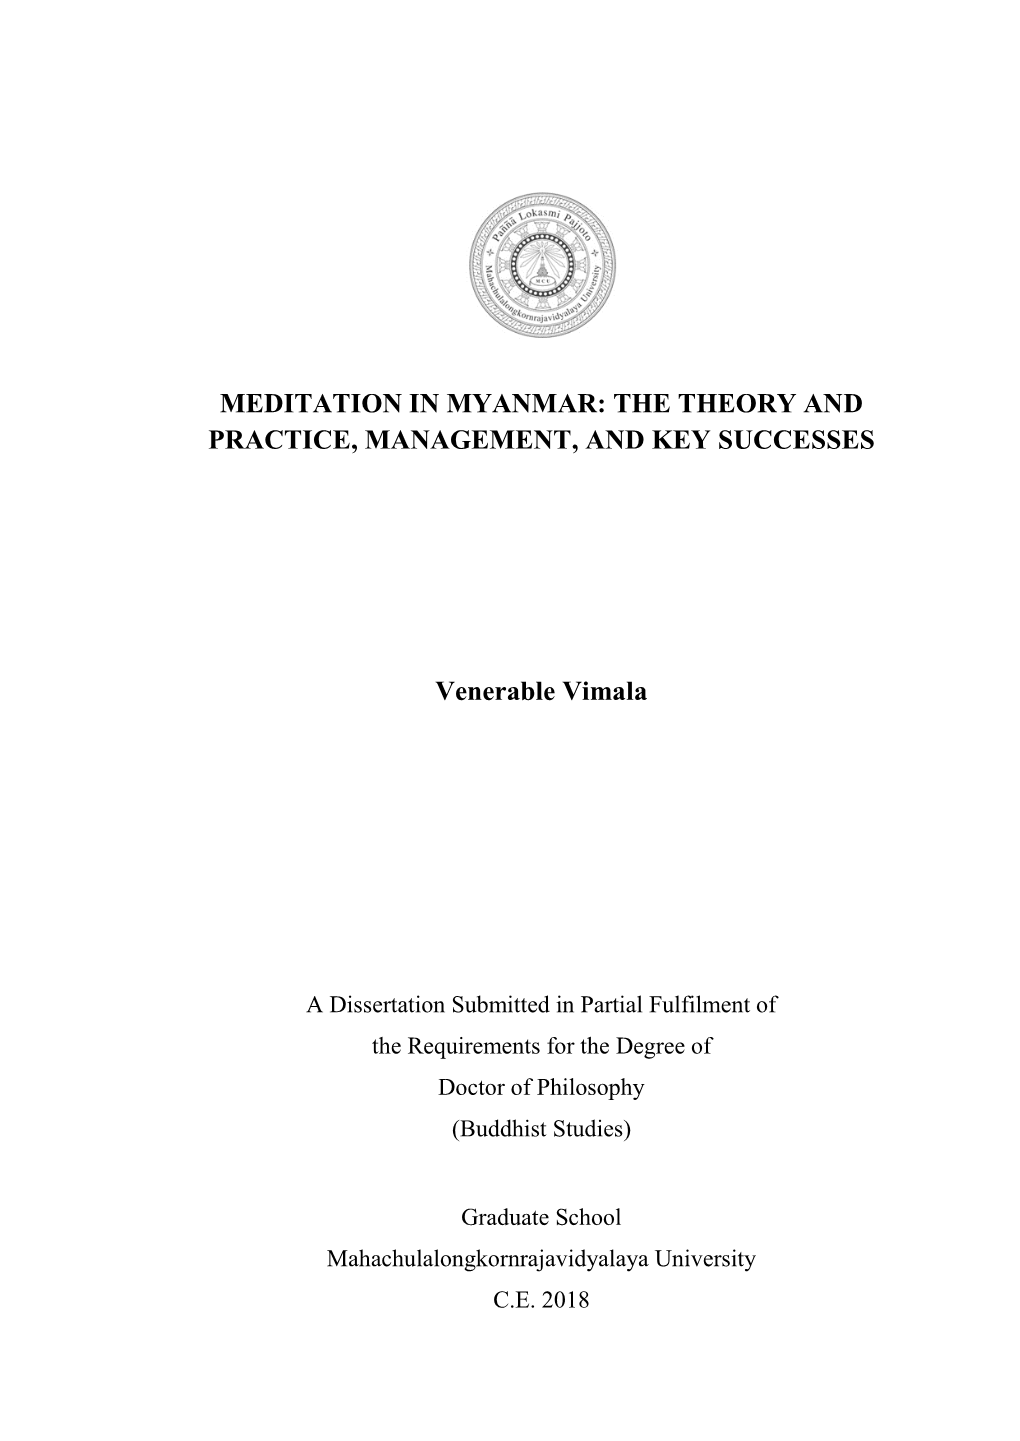 Meditation in Myanmar: the Theory and Practice, Management, and Key Successes